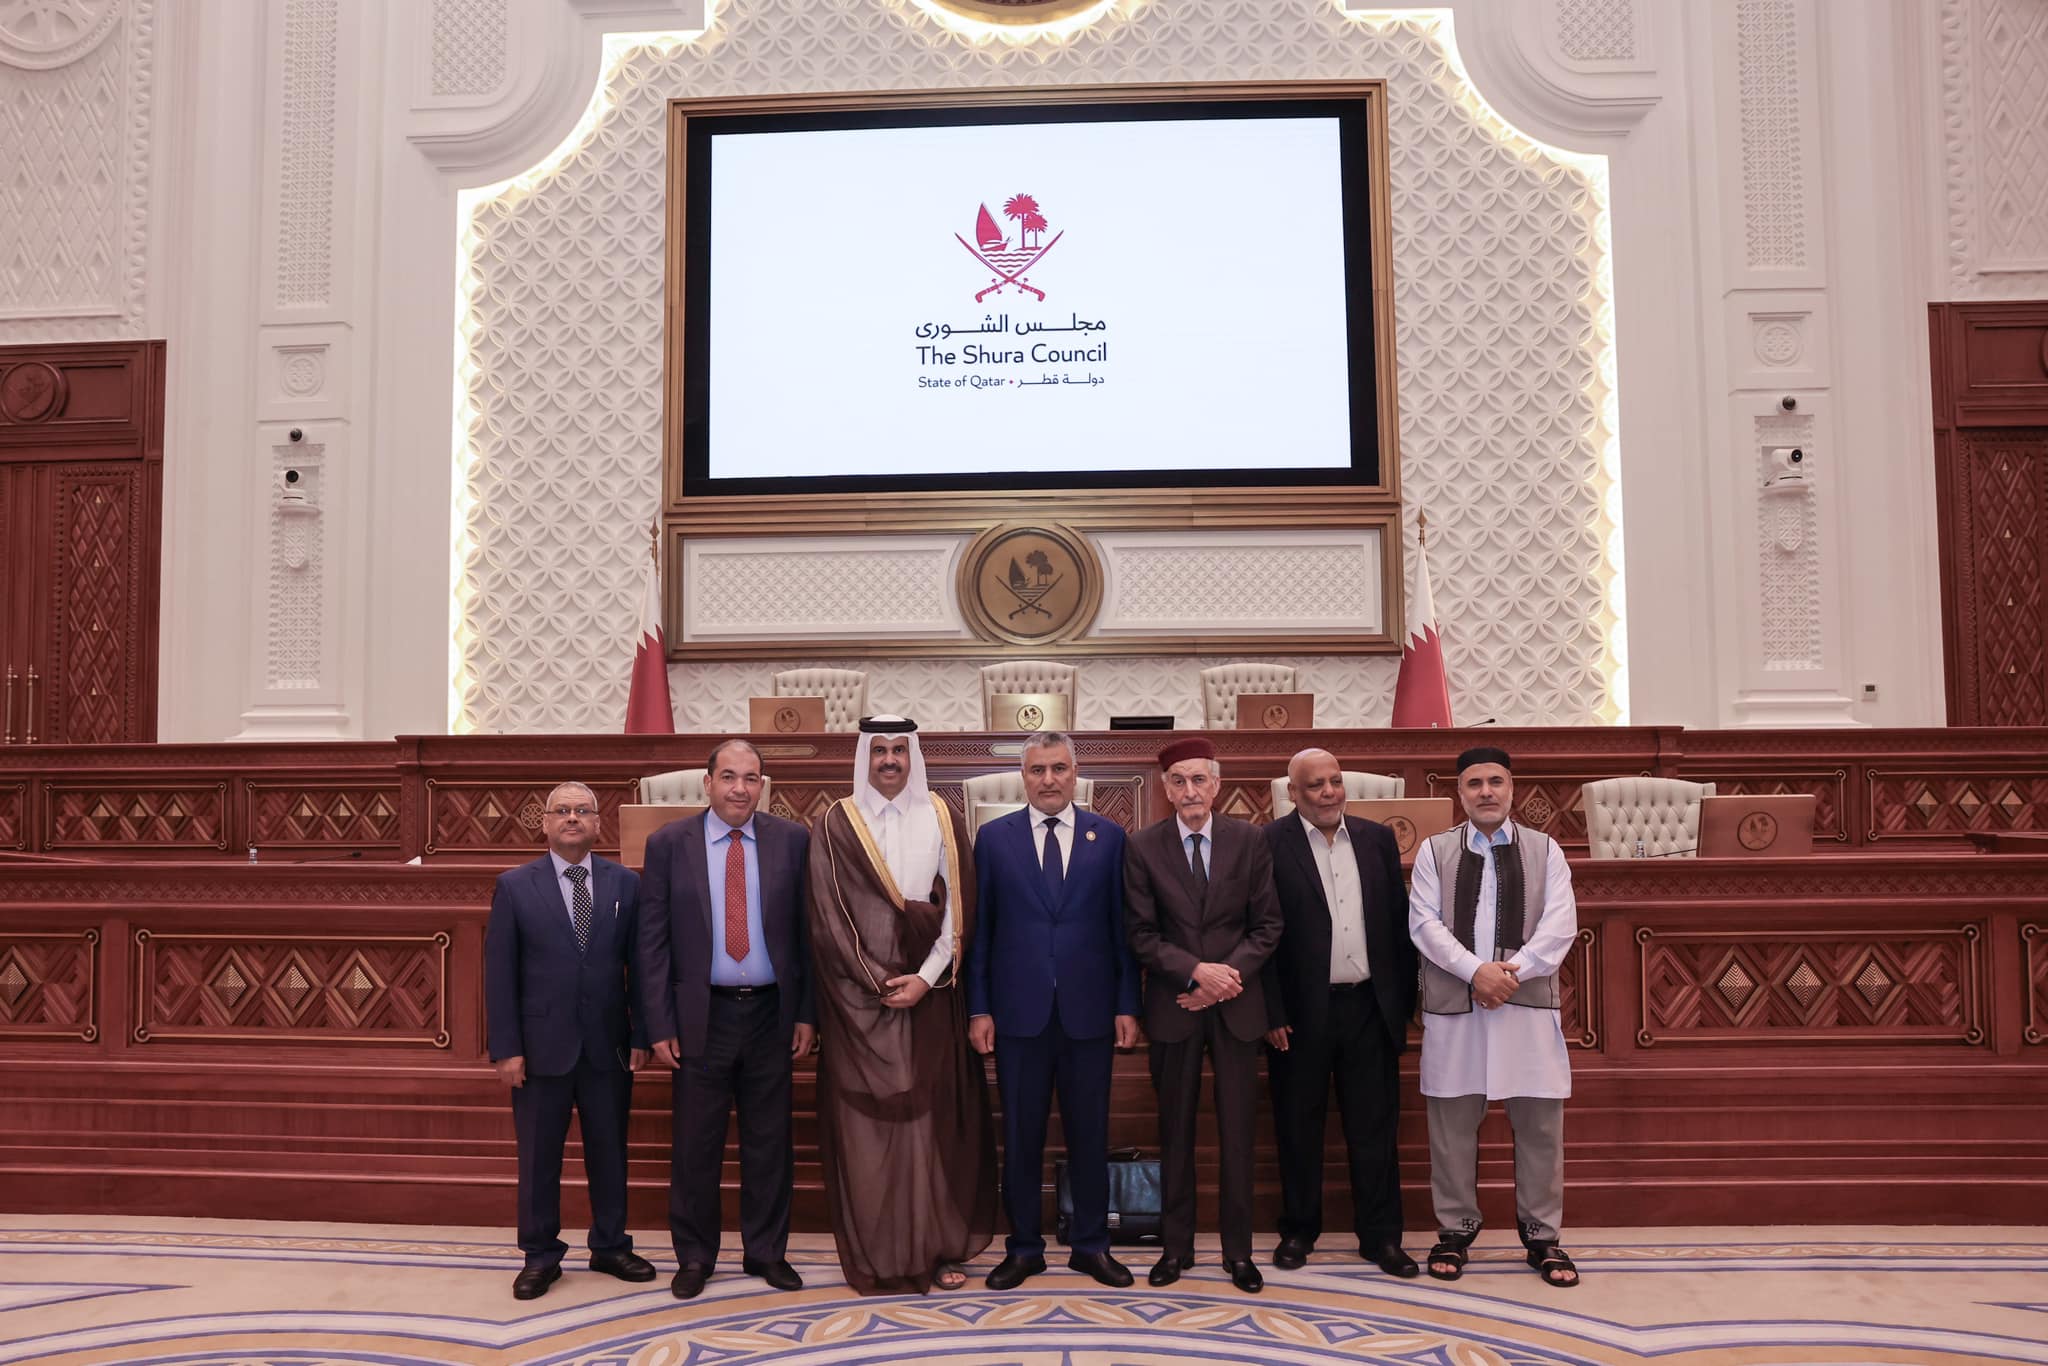 The President of the High Council of State visits the Qatari Shura Council.